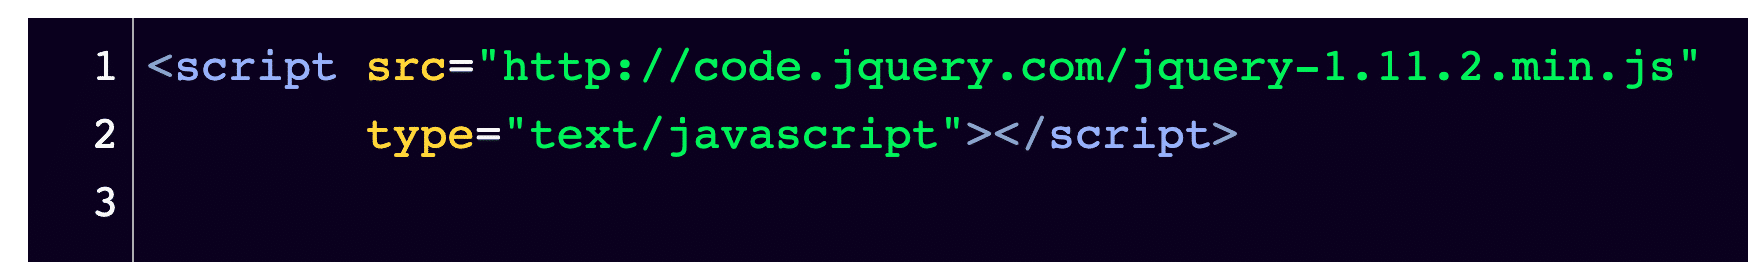 Your snippet of text should look like this in your code editor.